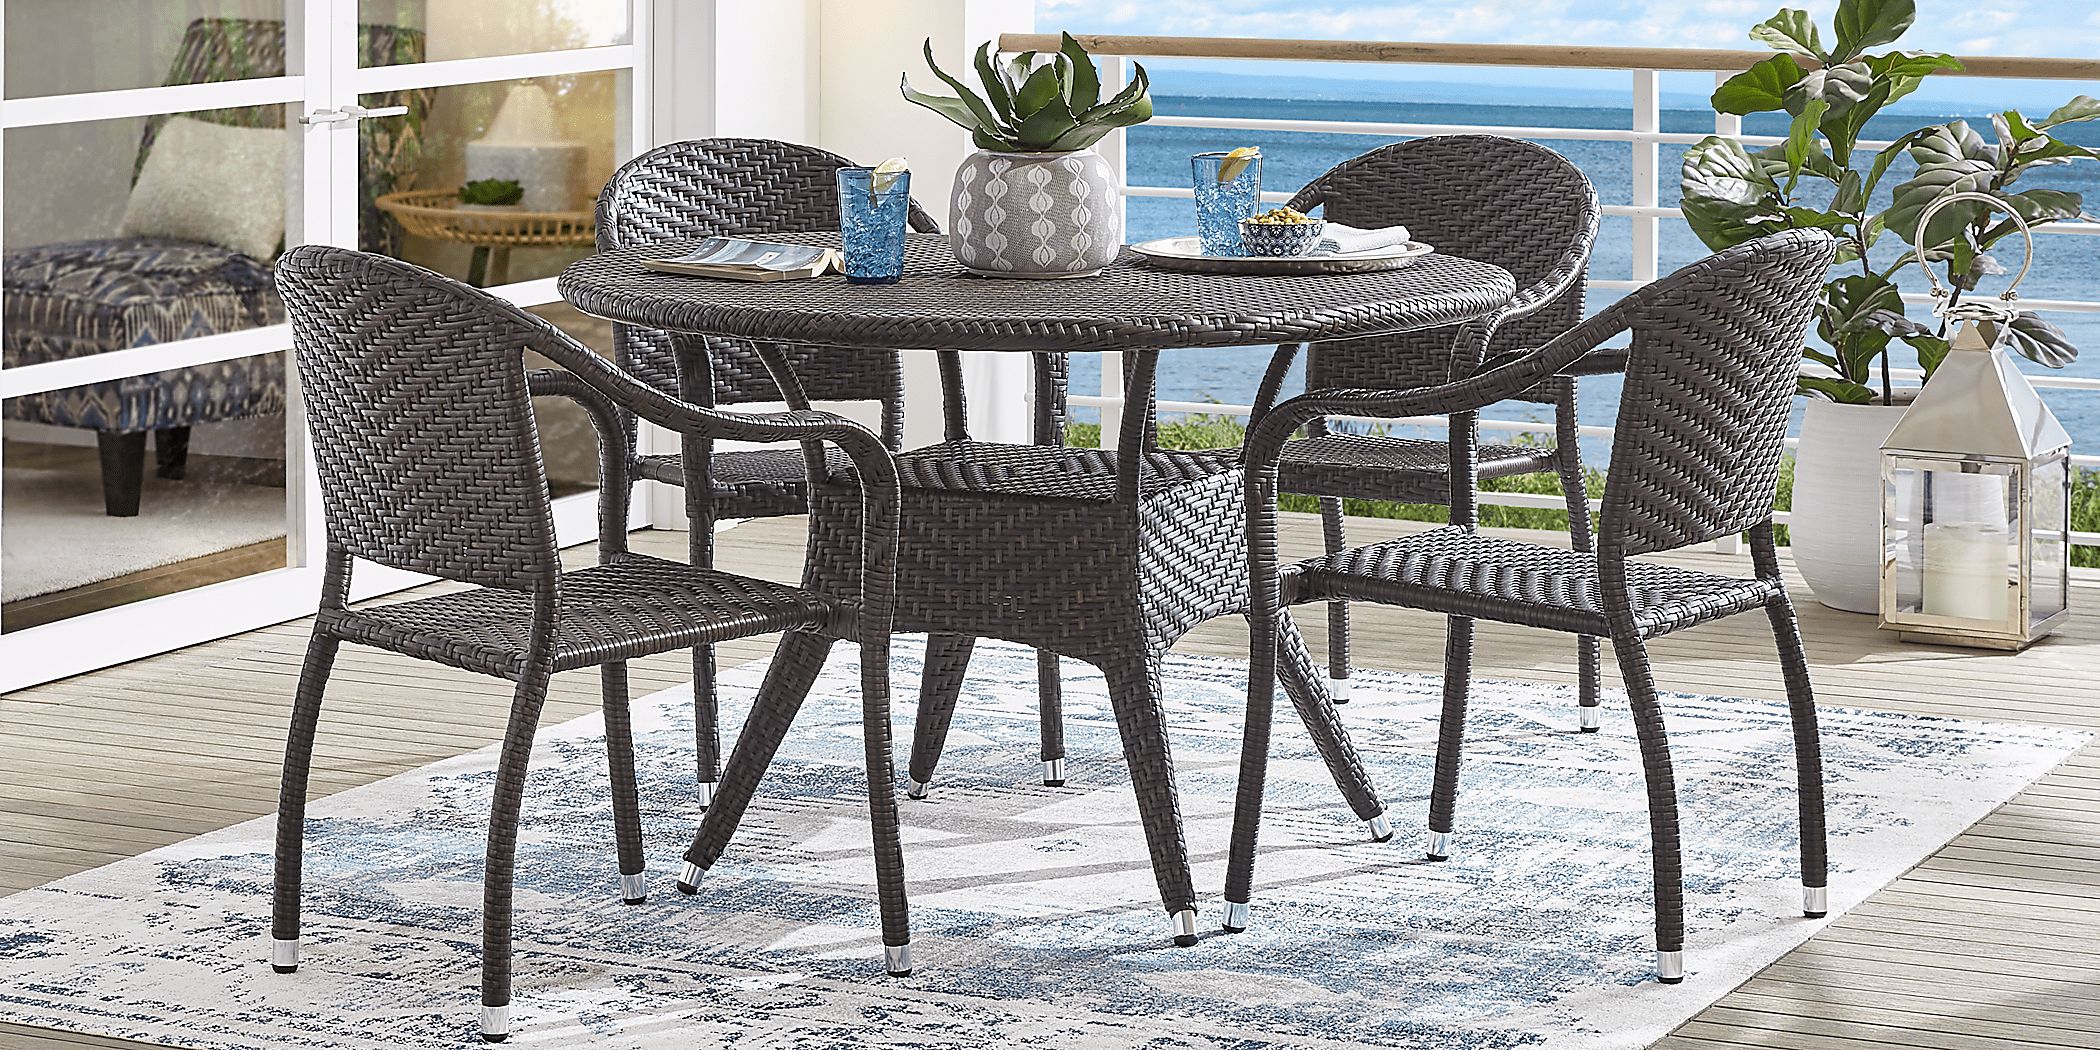 Giantex 5 Pc Patio Rattan Furniture Set Outdoor Backyard Dining Table and 4 Chairs Gray 